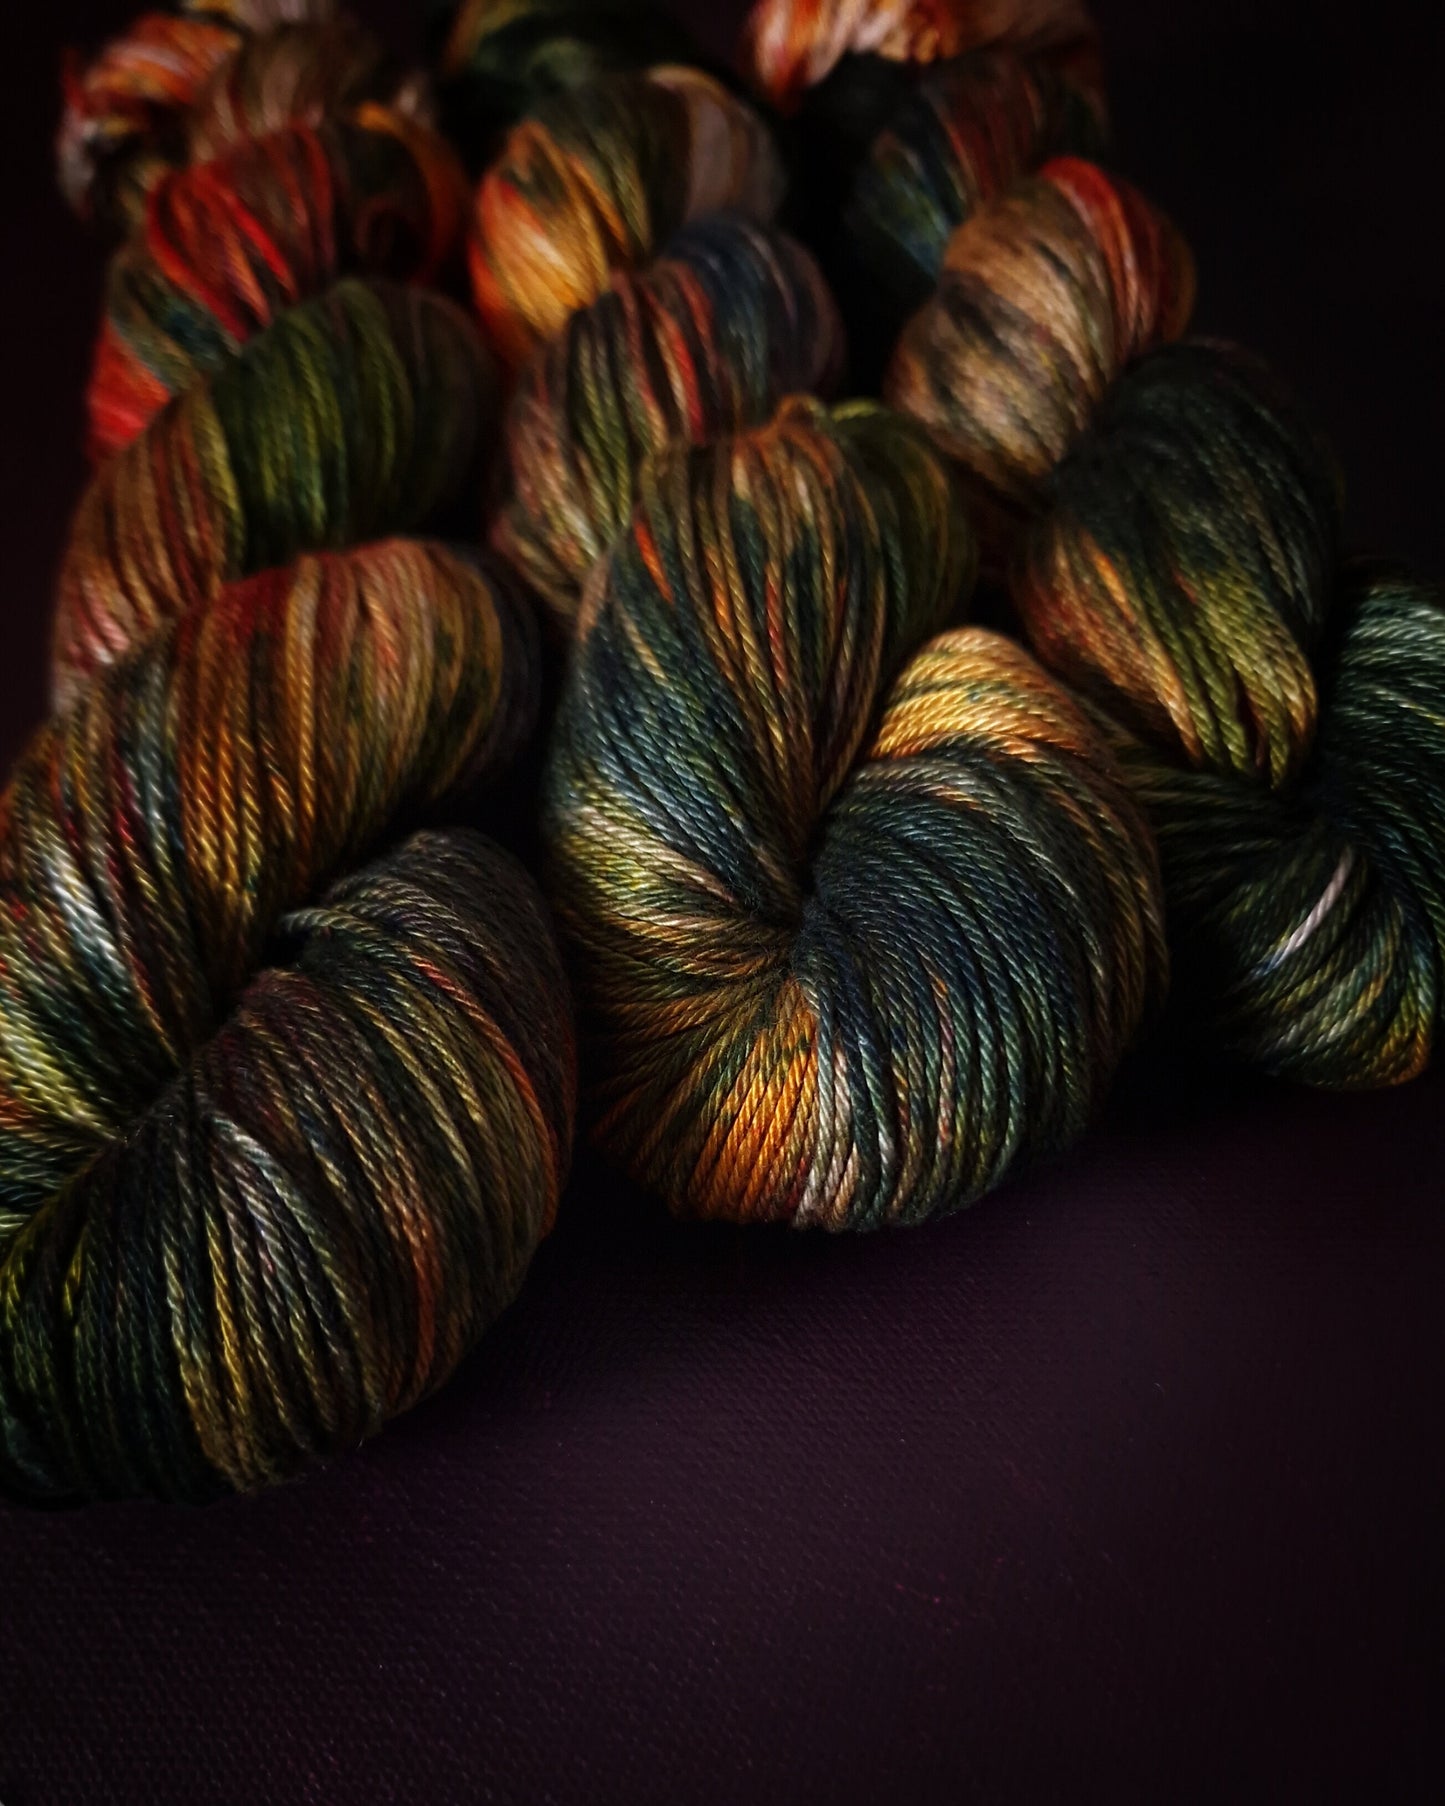 Hand dyed yarn ~ Sunset Delight No 3 ~ mercerized cotton yarn, vegan, hand painted, indie dyed